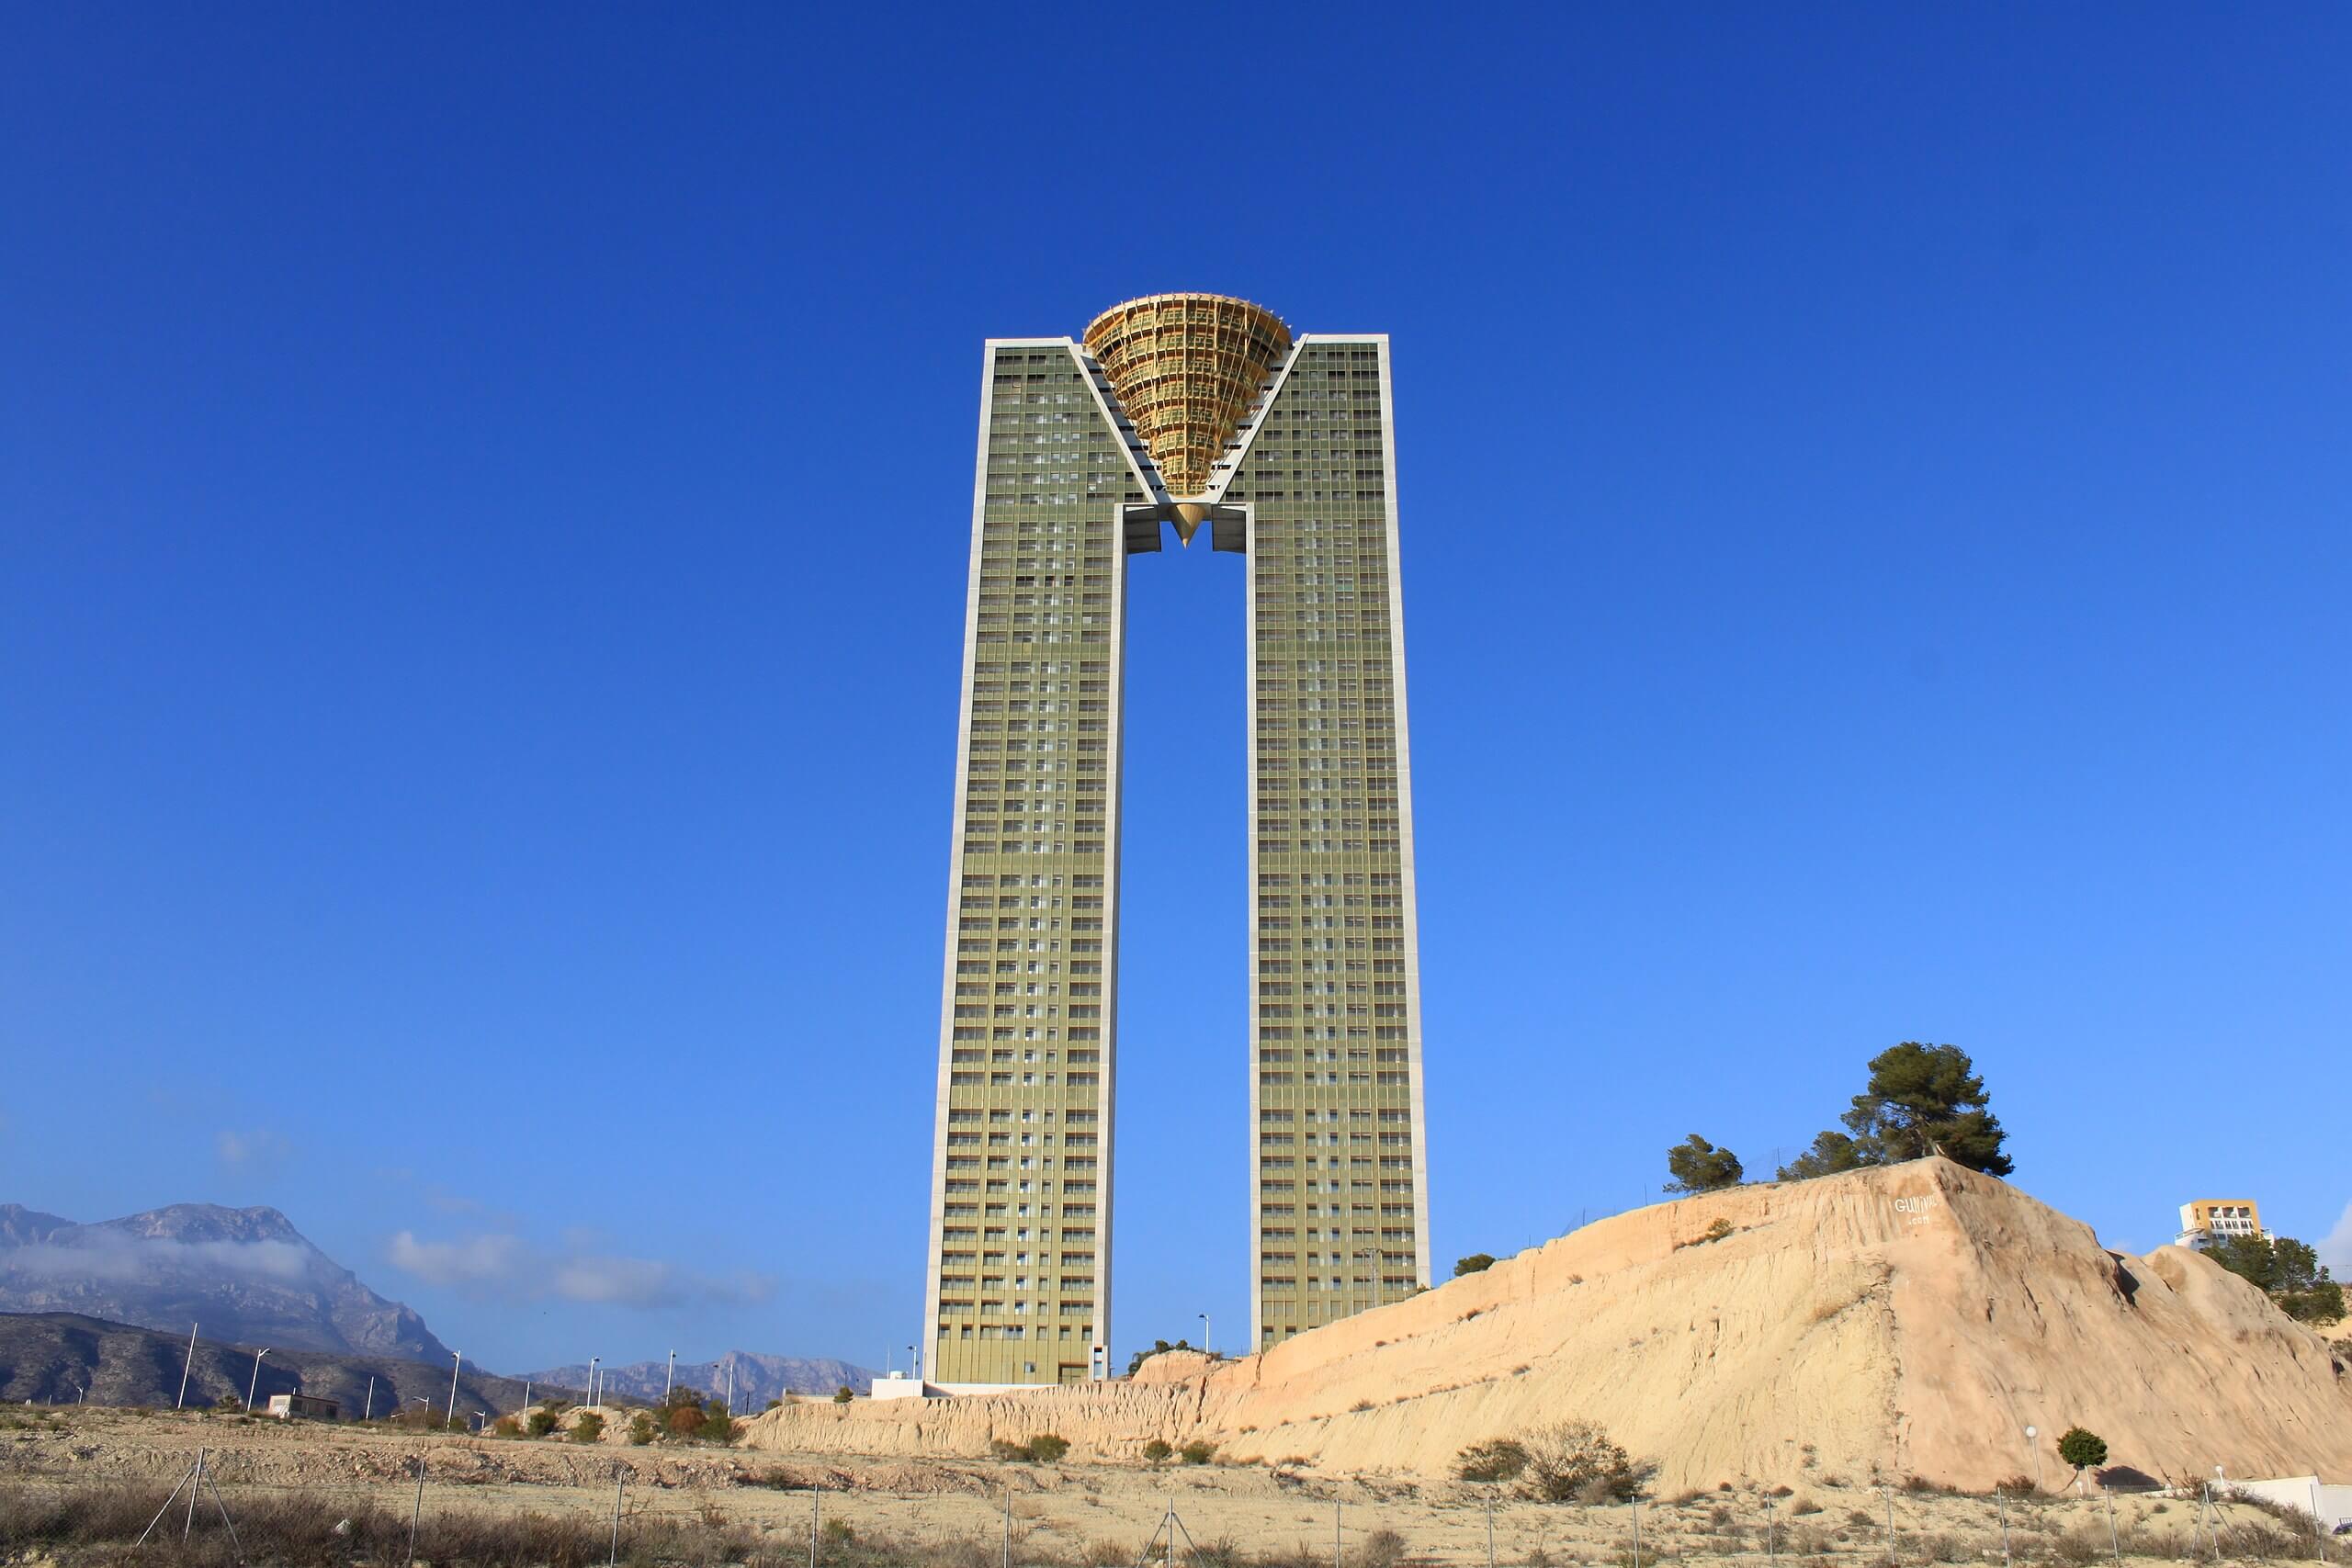 view of an m-shaped tower from an abandoned wasteland